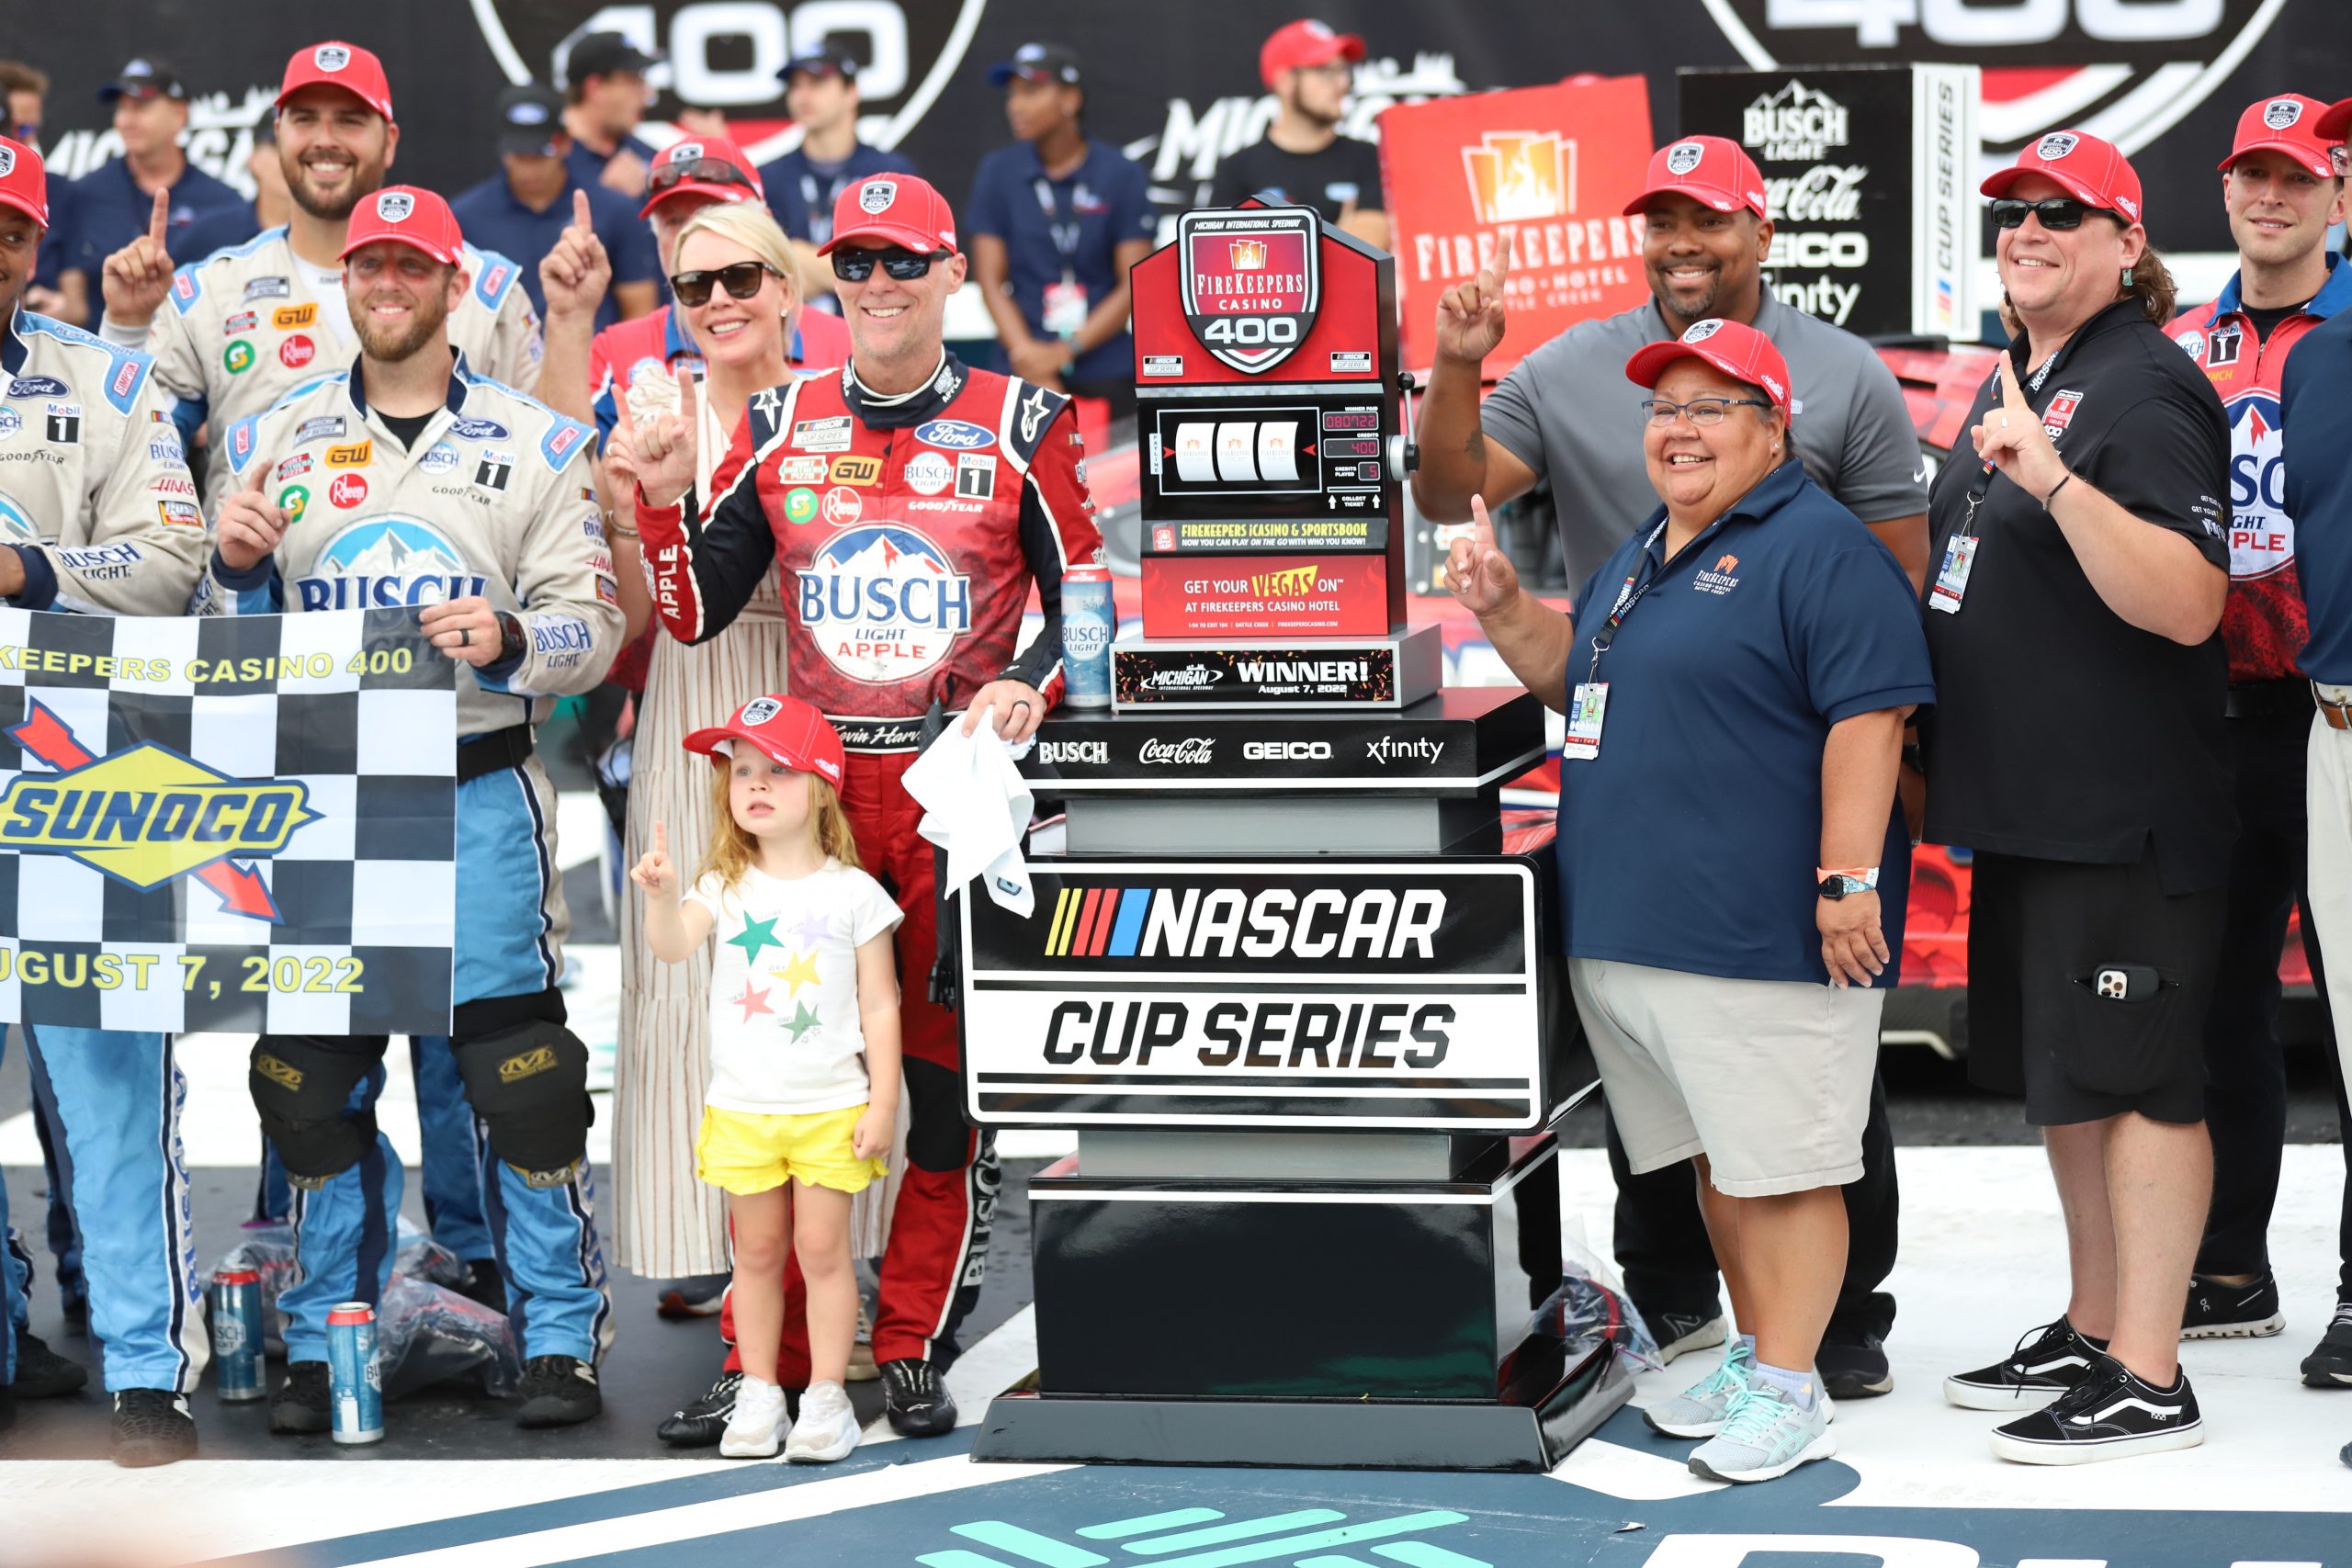 Welcome to the 2022 NASCAR Playoffs, Kevin Harvick. (Photo: Dylan Nadwodny | The Podium Finish)